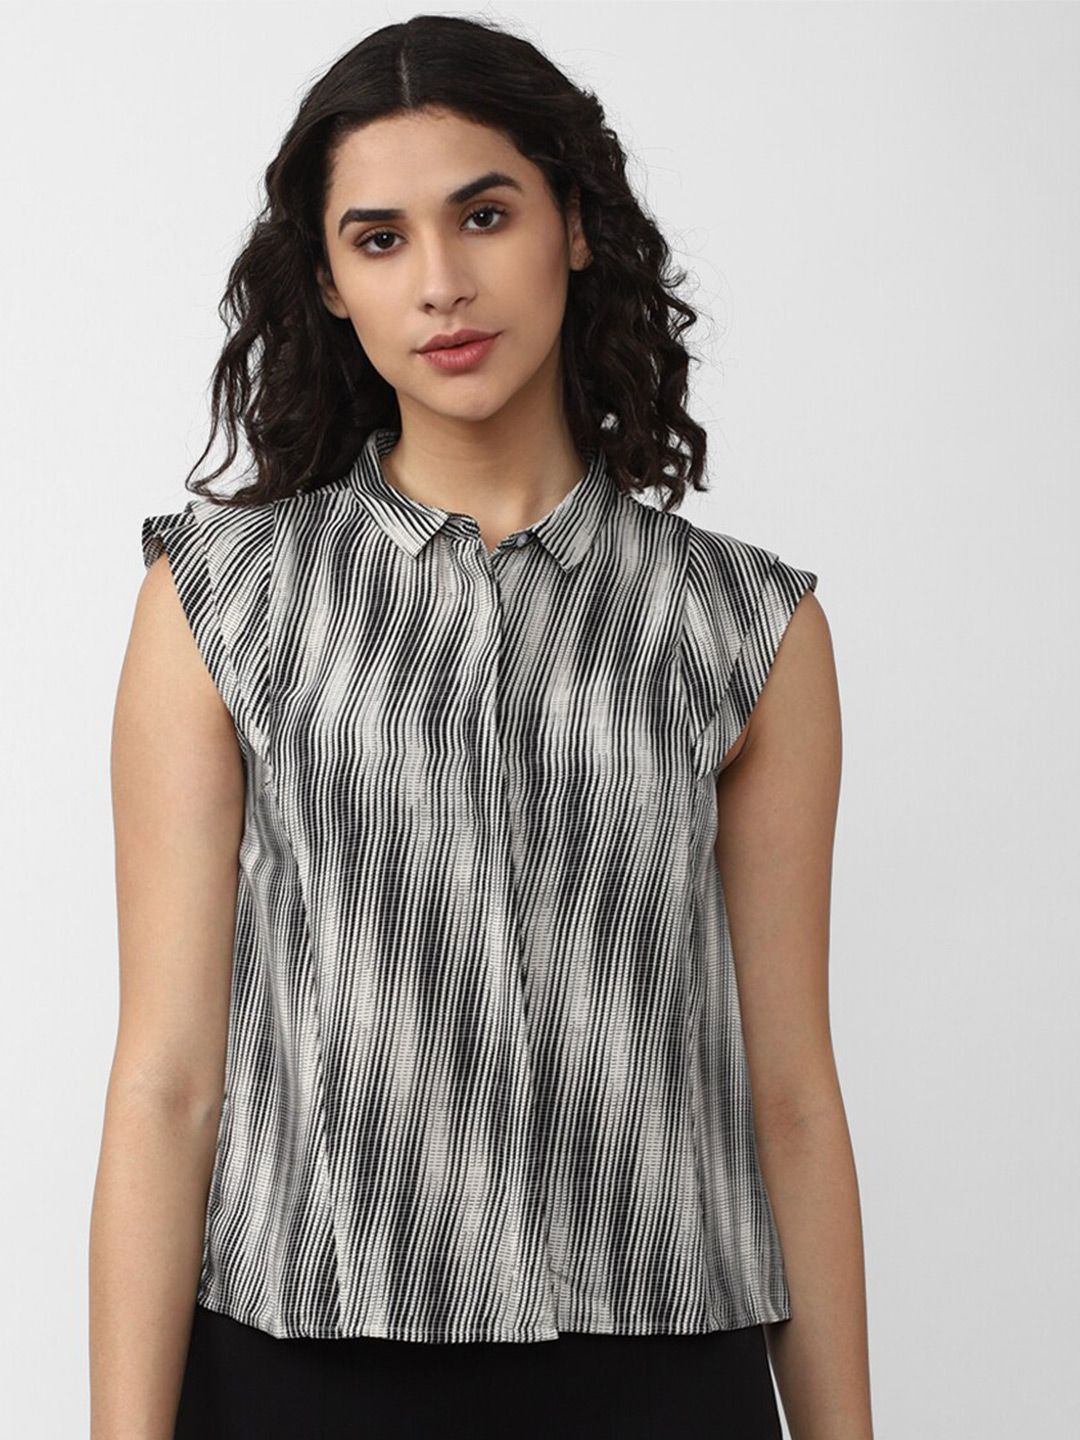 Van Heusen Woman Striped Shirt Style Pure Cotton Top Price in India